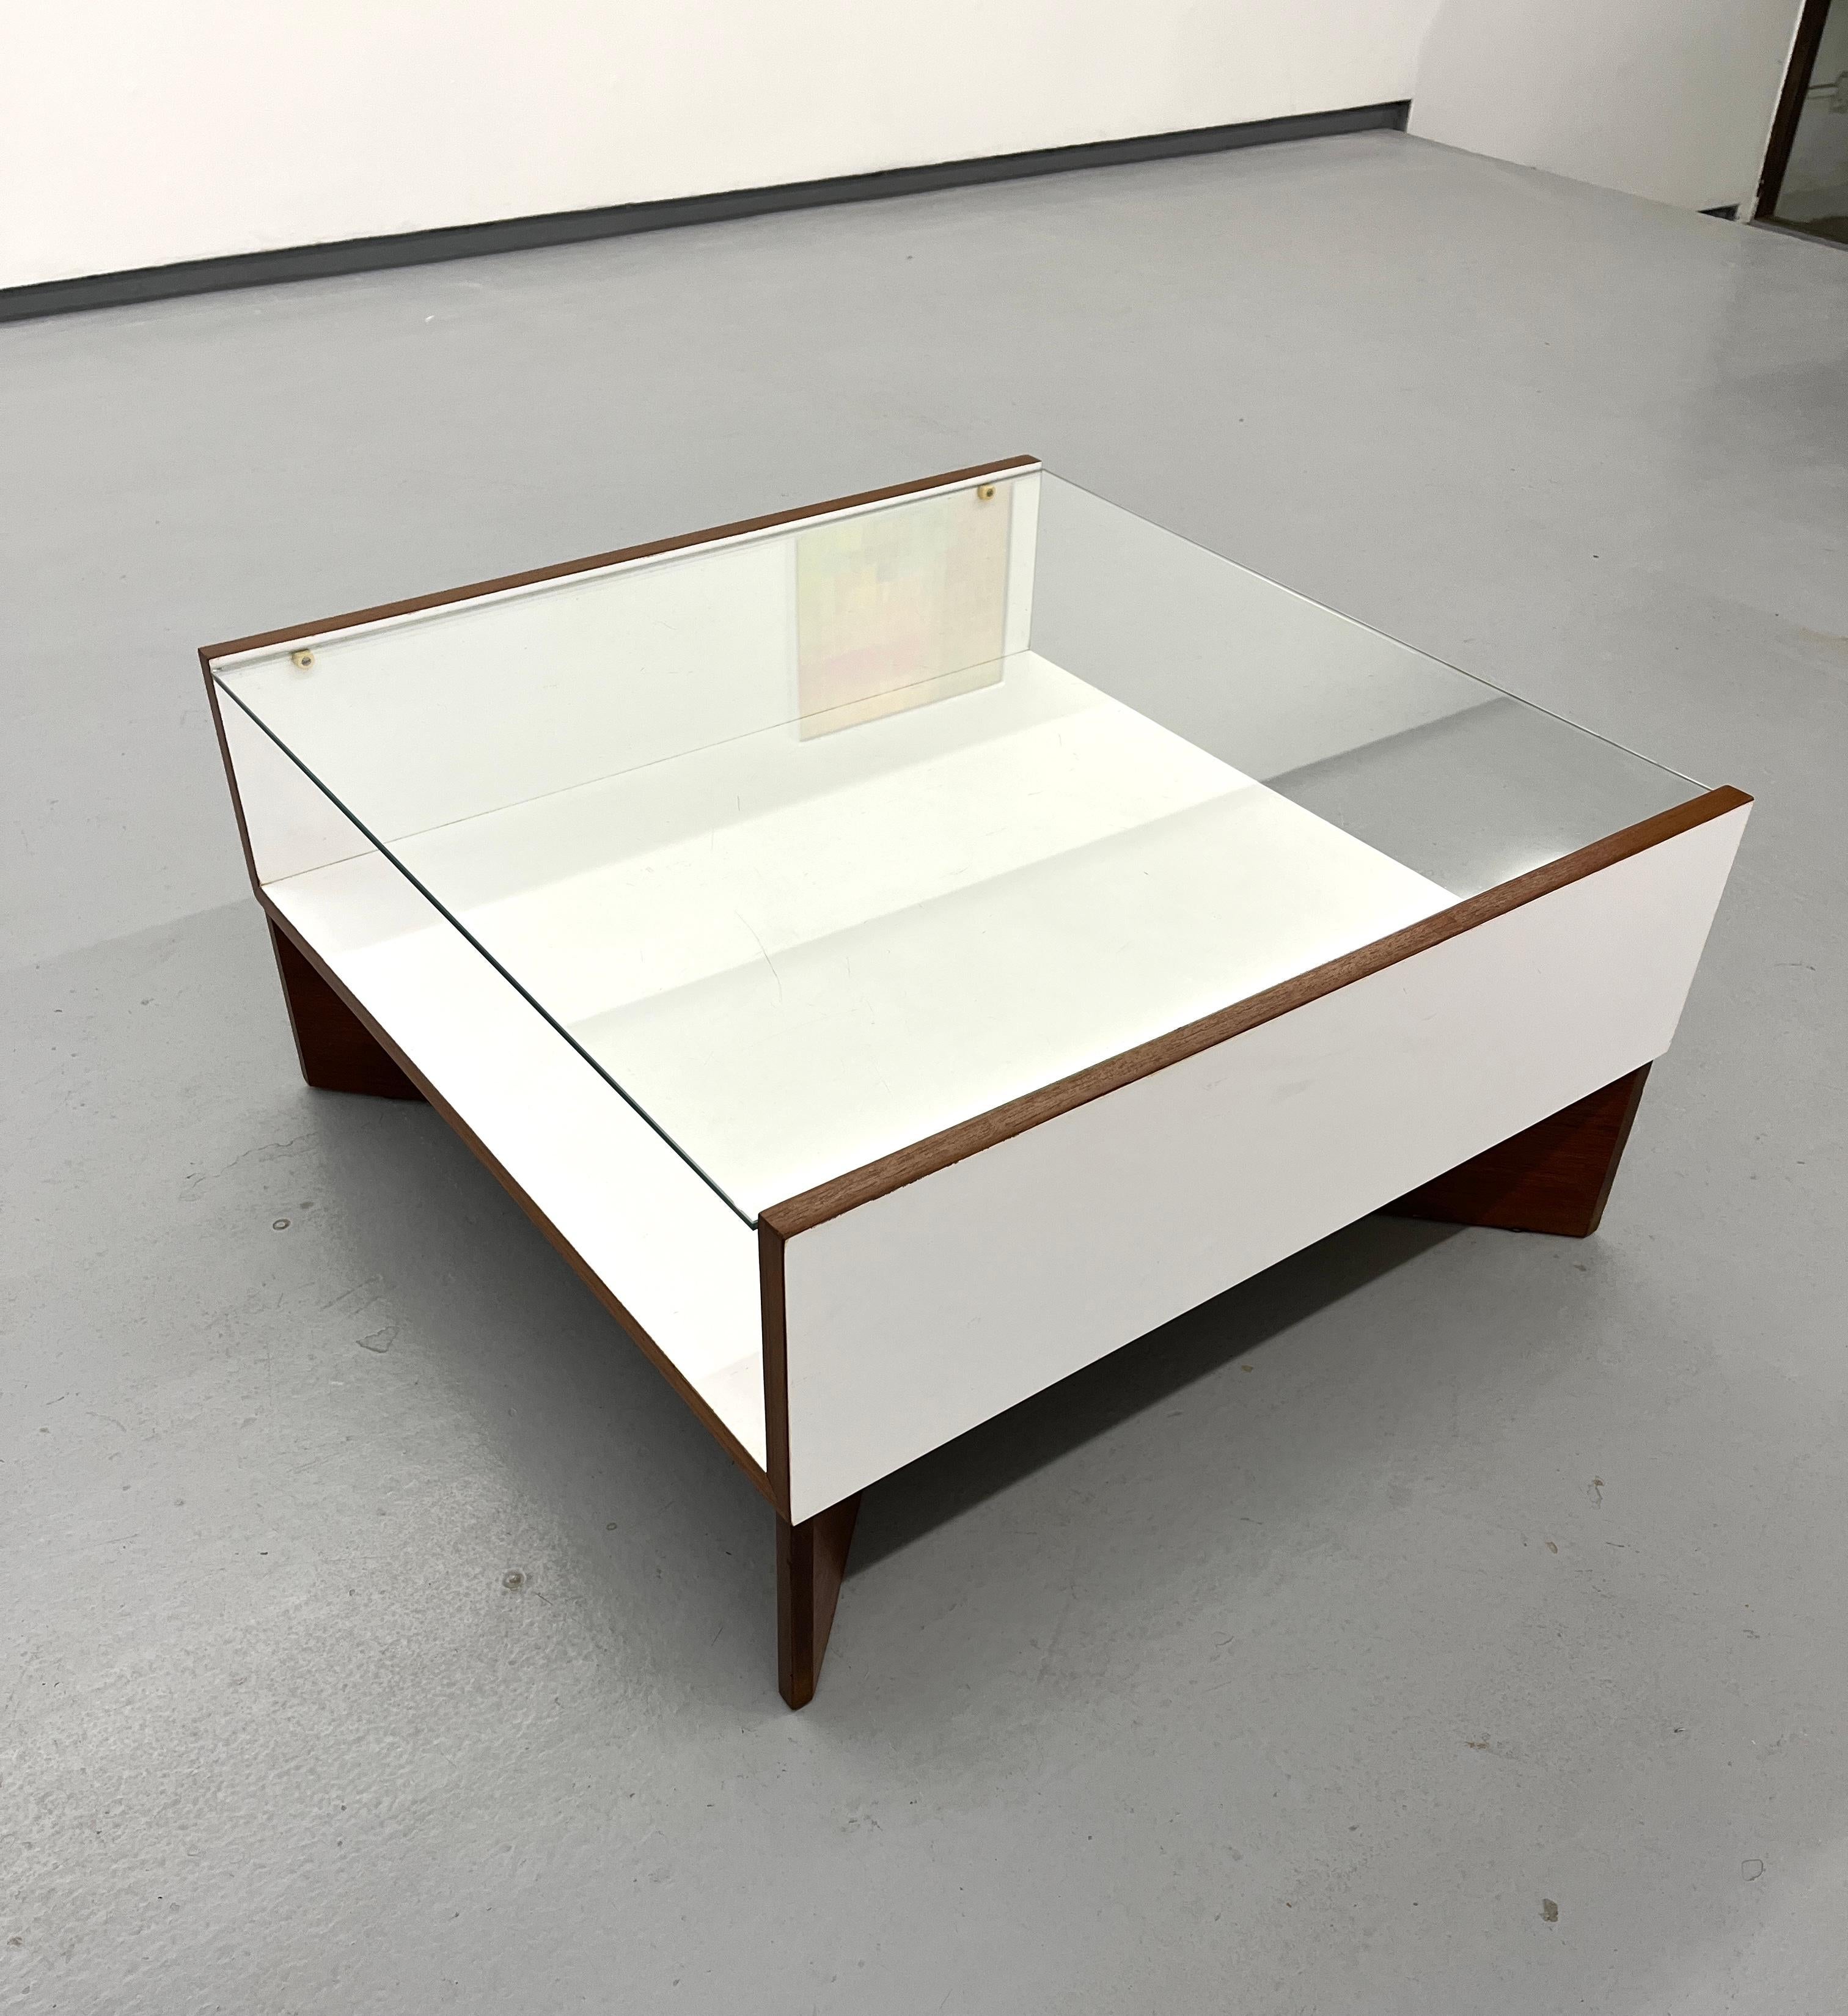 Aquilon teak coffee table by Pierre Guariche, Les Huchers-Minvielle, 1960

Rare Aquilon furniture by Pierre Guariche

Pierre Guariche (1926 - 1995) is one of the legendary French designers of the 1950s, who left his mark on his era with purely